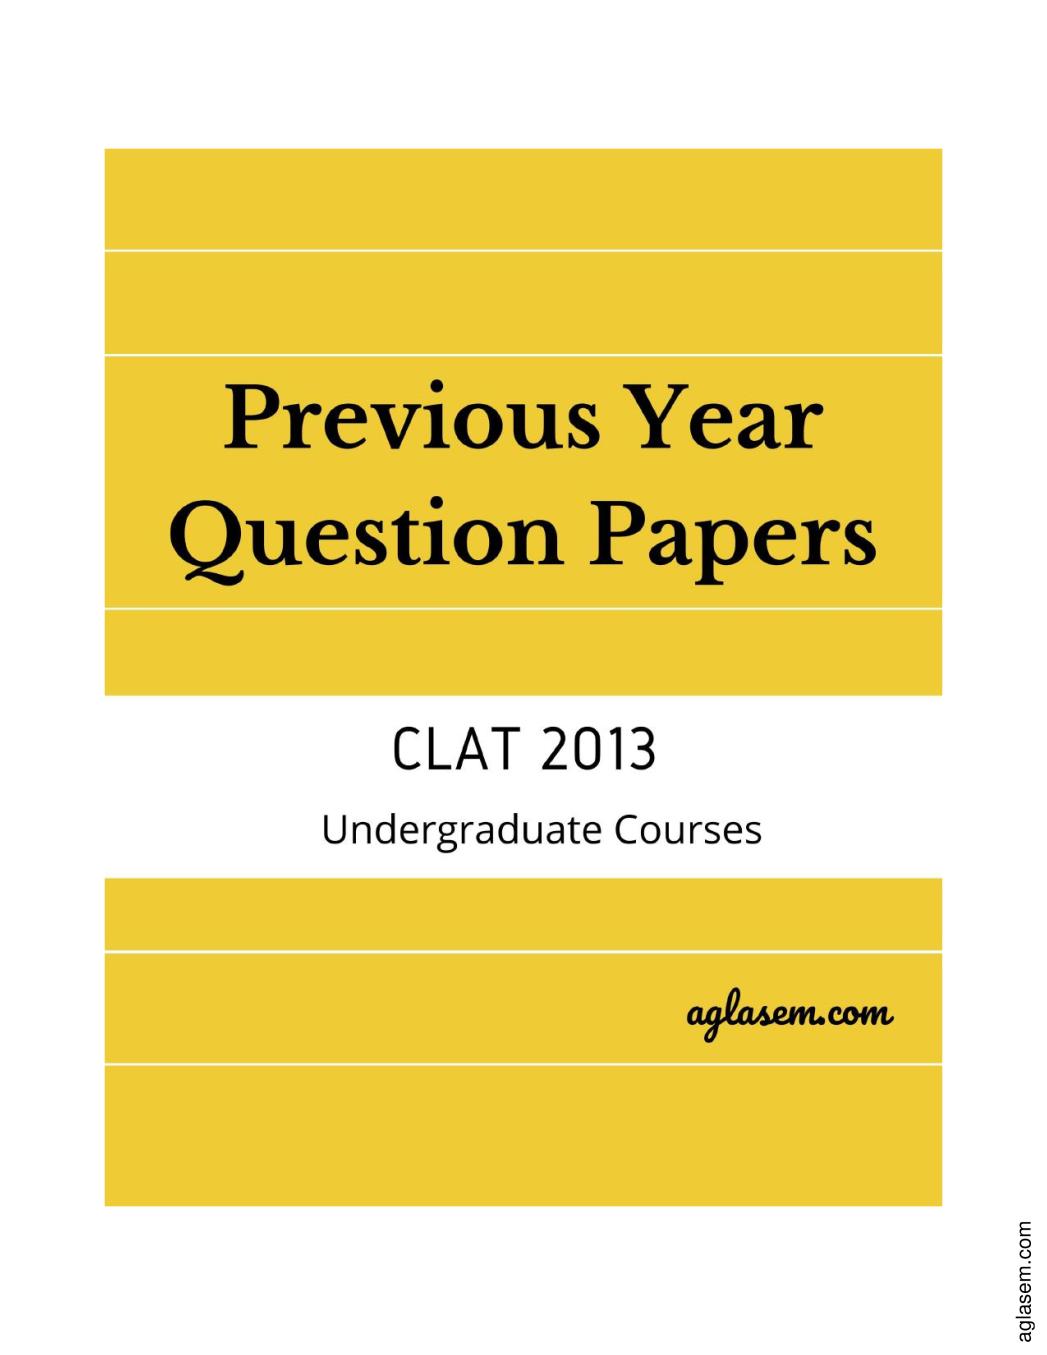 CLAT 2013 Question Paper - Page 1